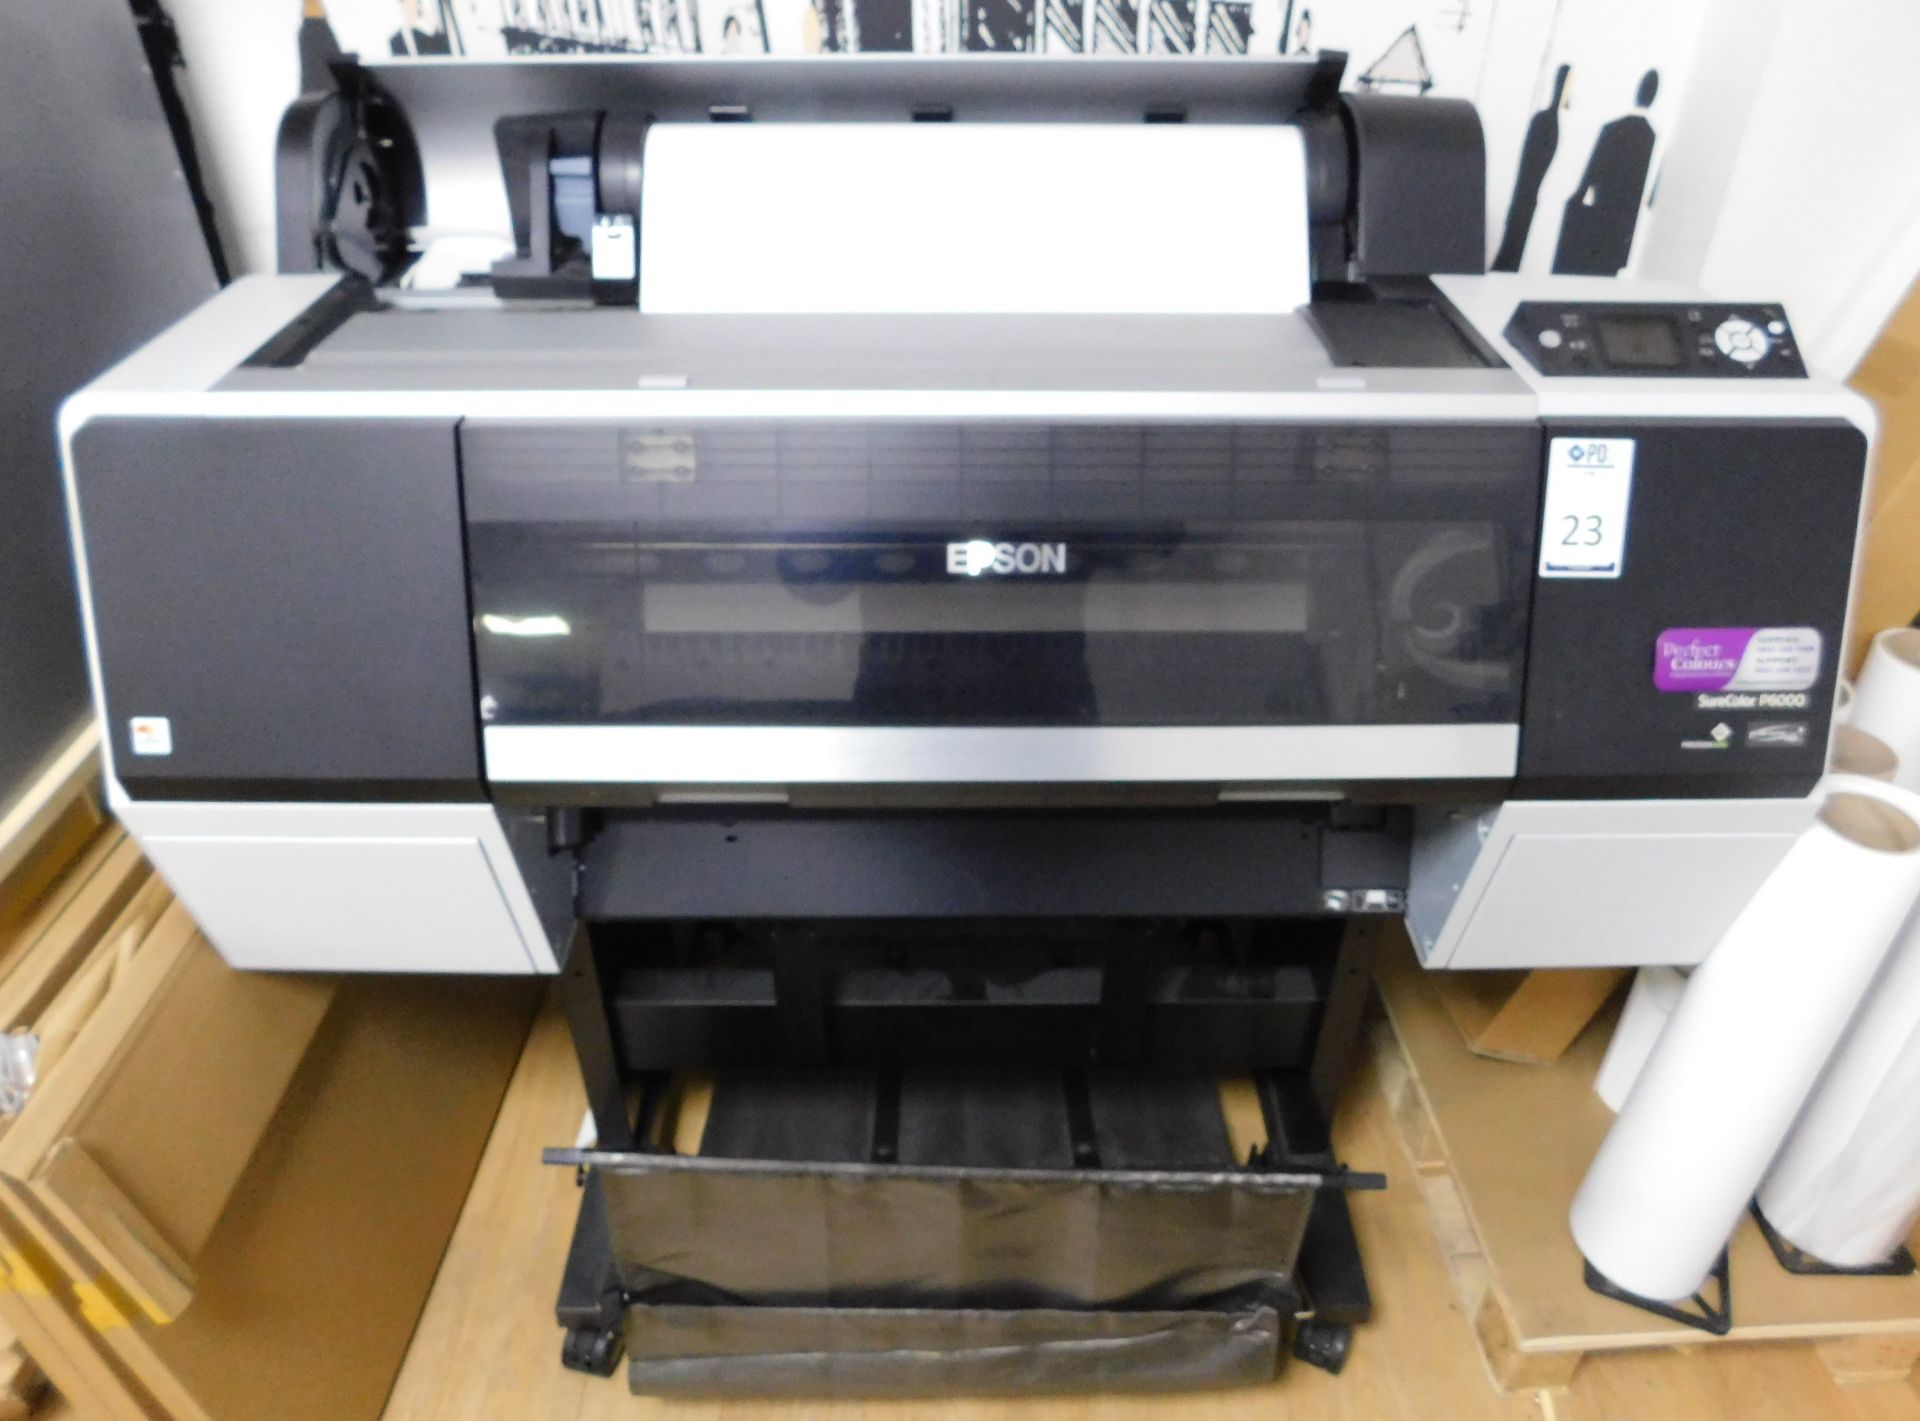 Epson SureColor P6000 Wide Format Printer (2017), Serial Number VMCE001372 (Location: Brentwood.